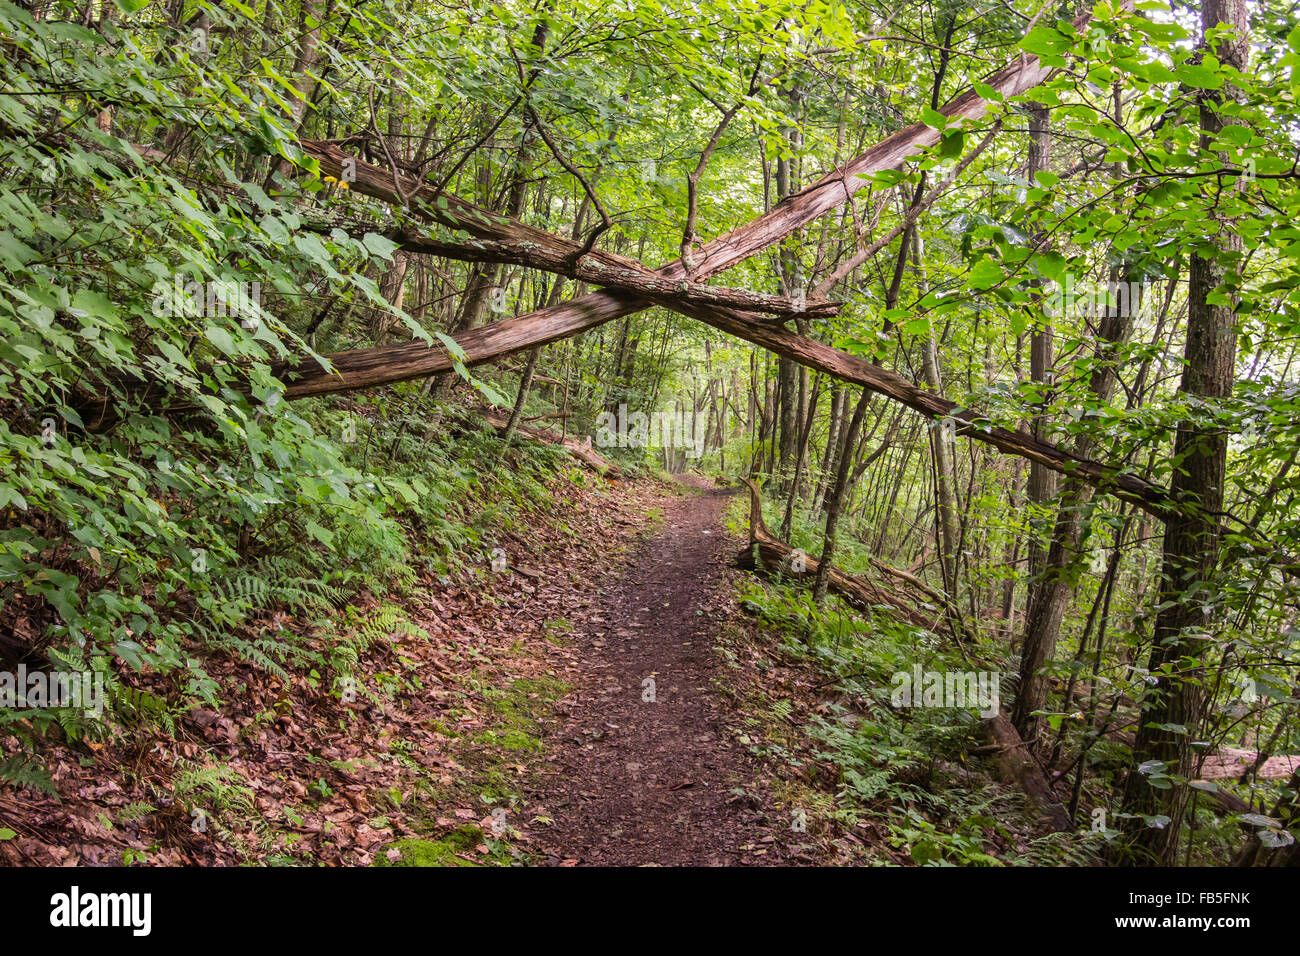 Fallen trees leaning against each other wait to fall, forming a dangerous condition for hikers Stock Photo